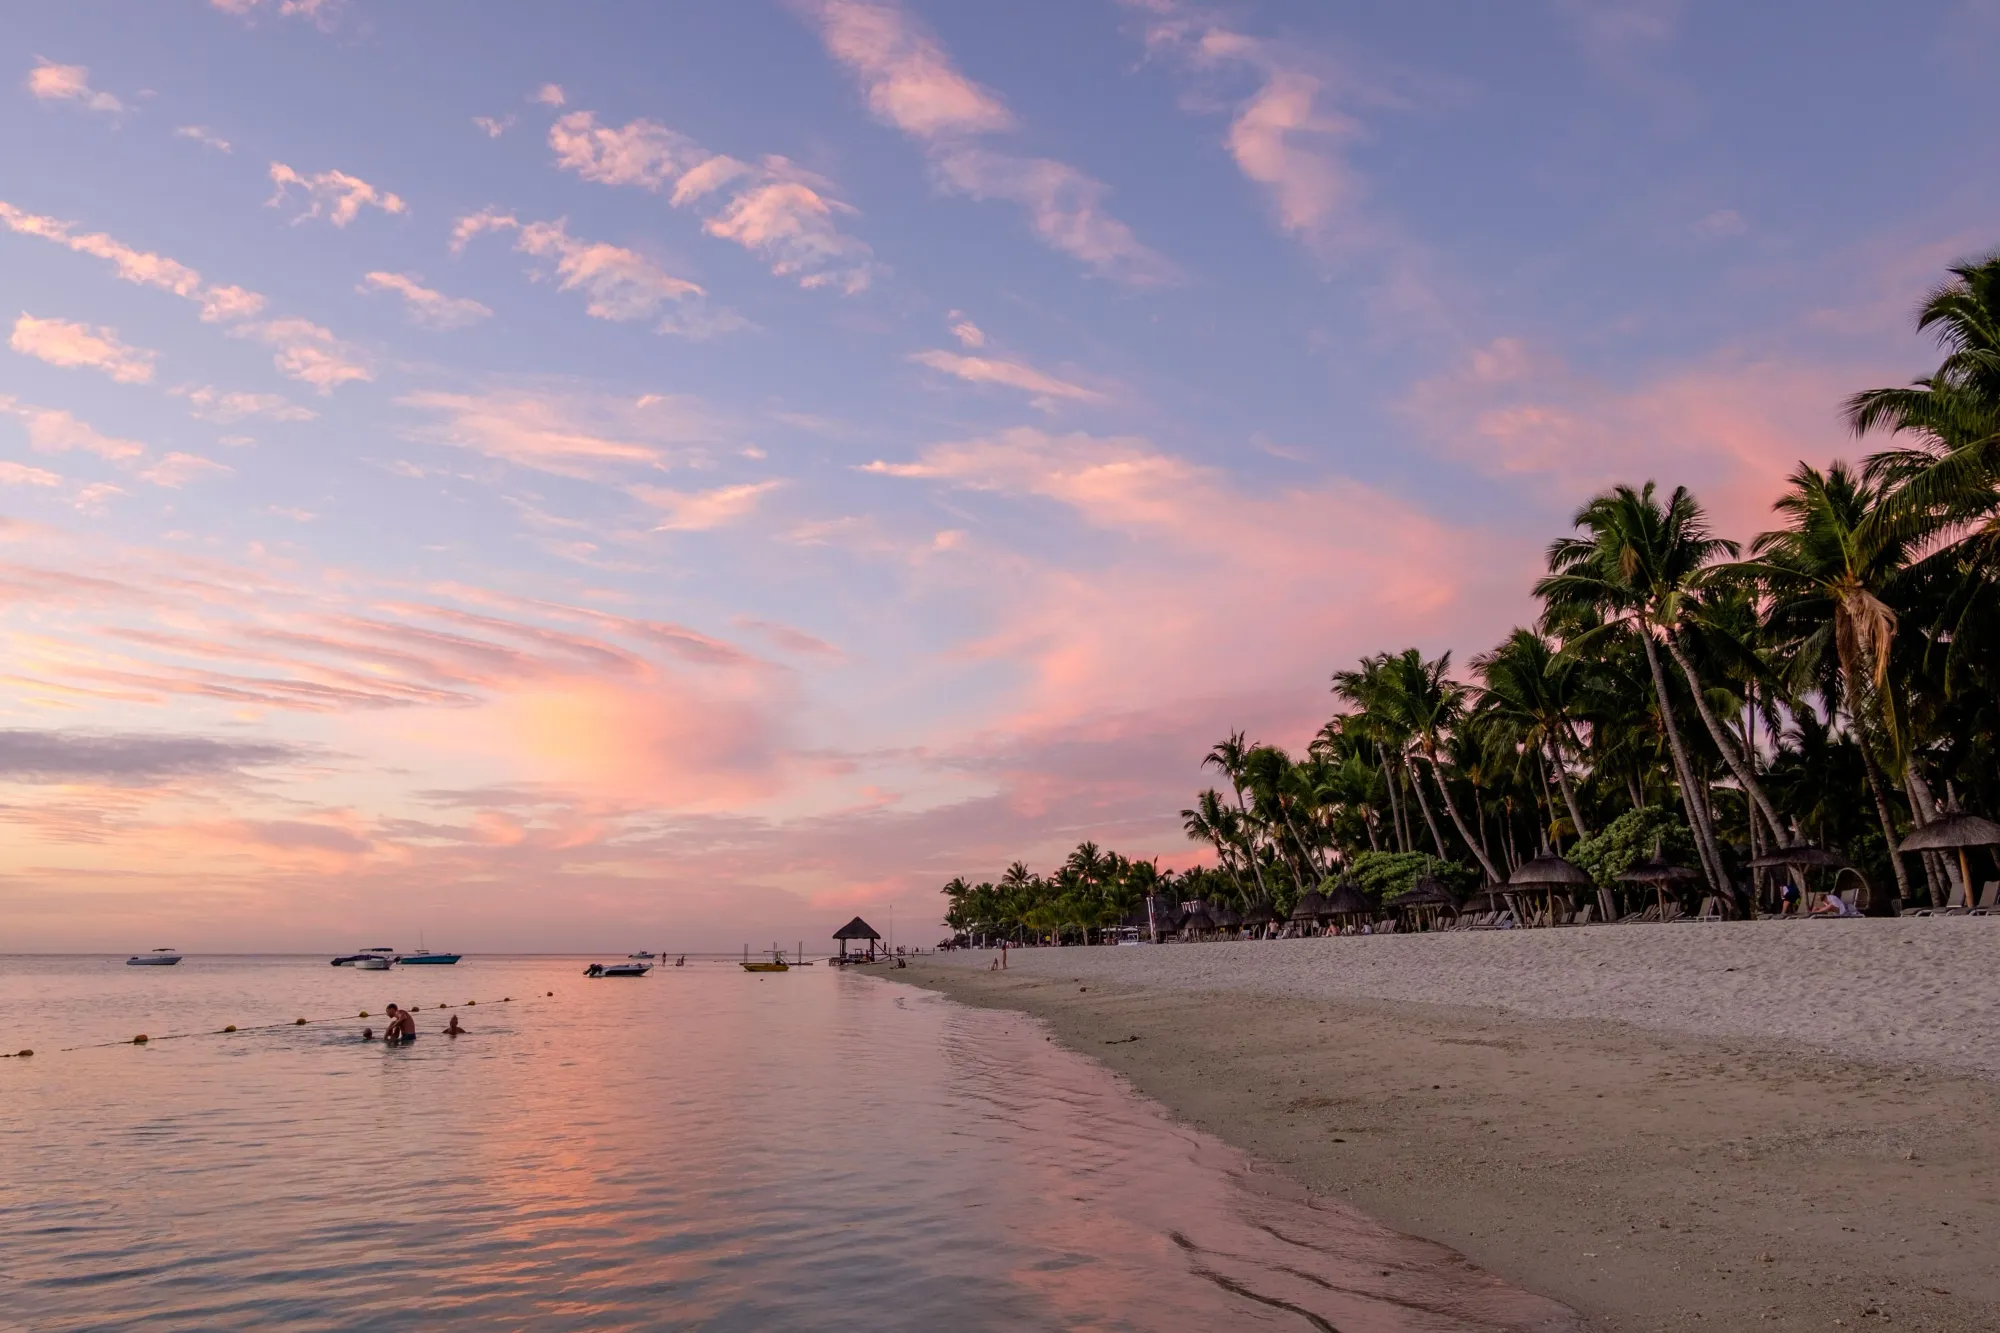 Image of a beach in Mauritius at sunset